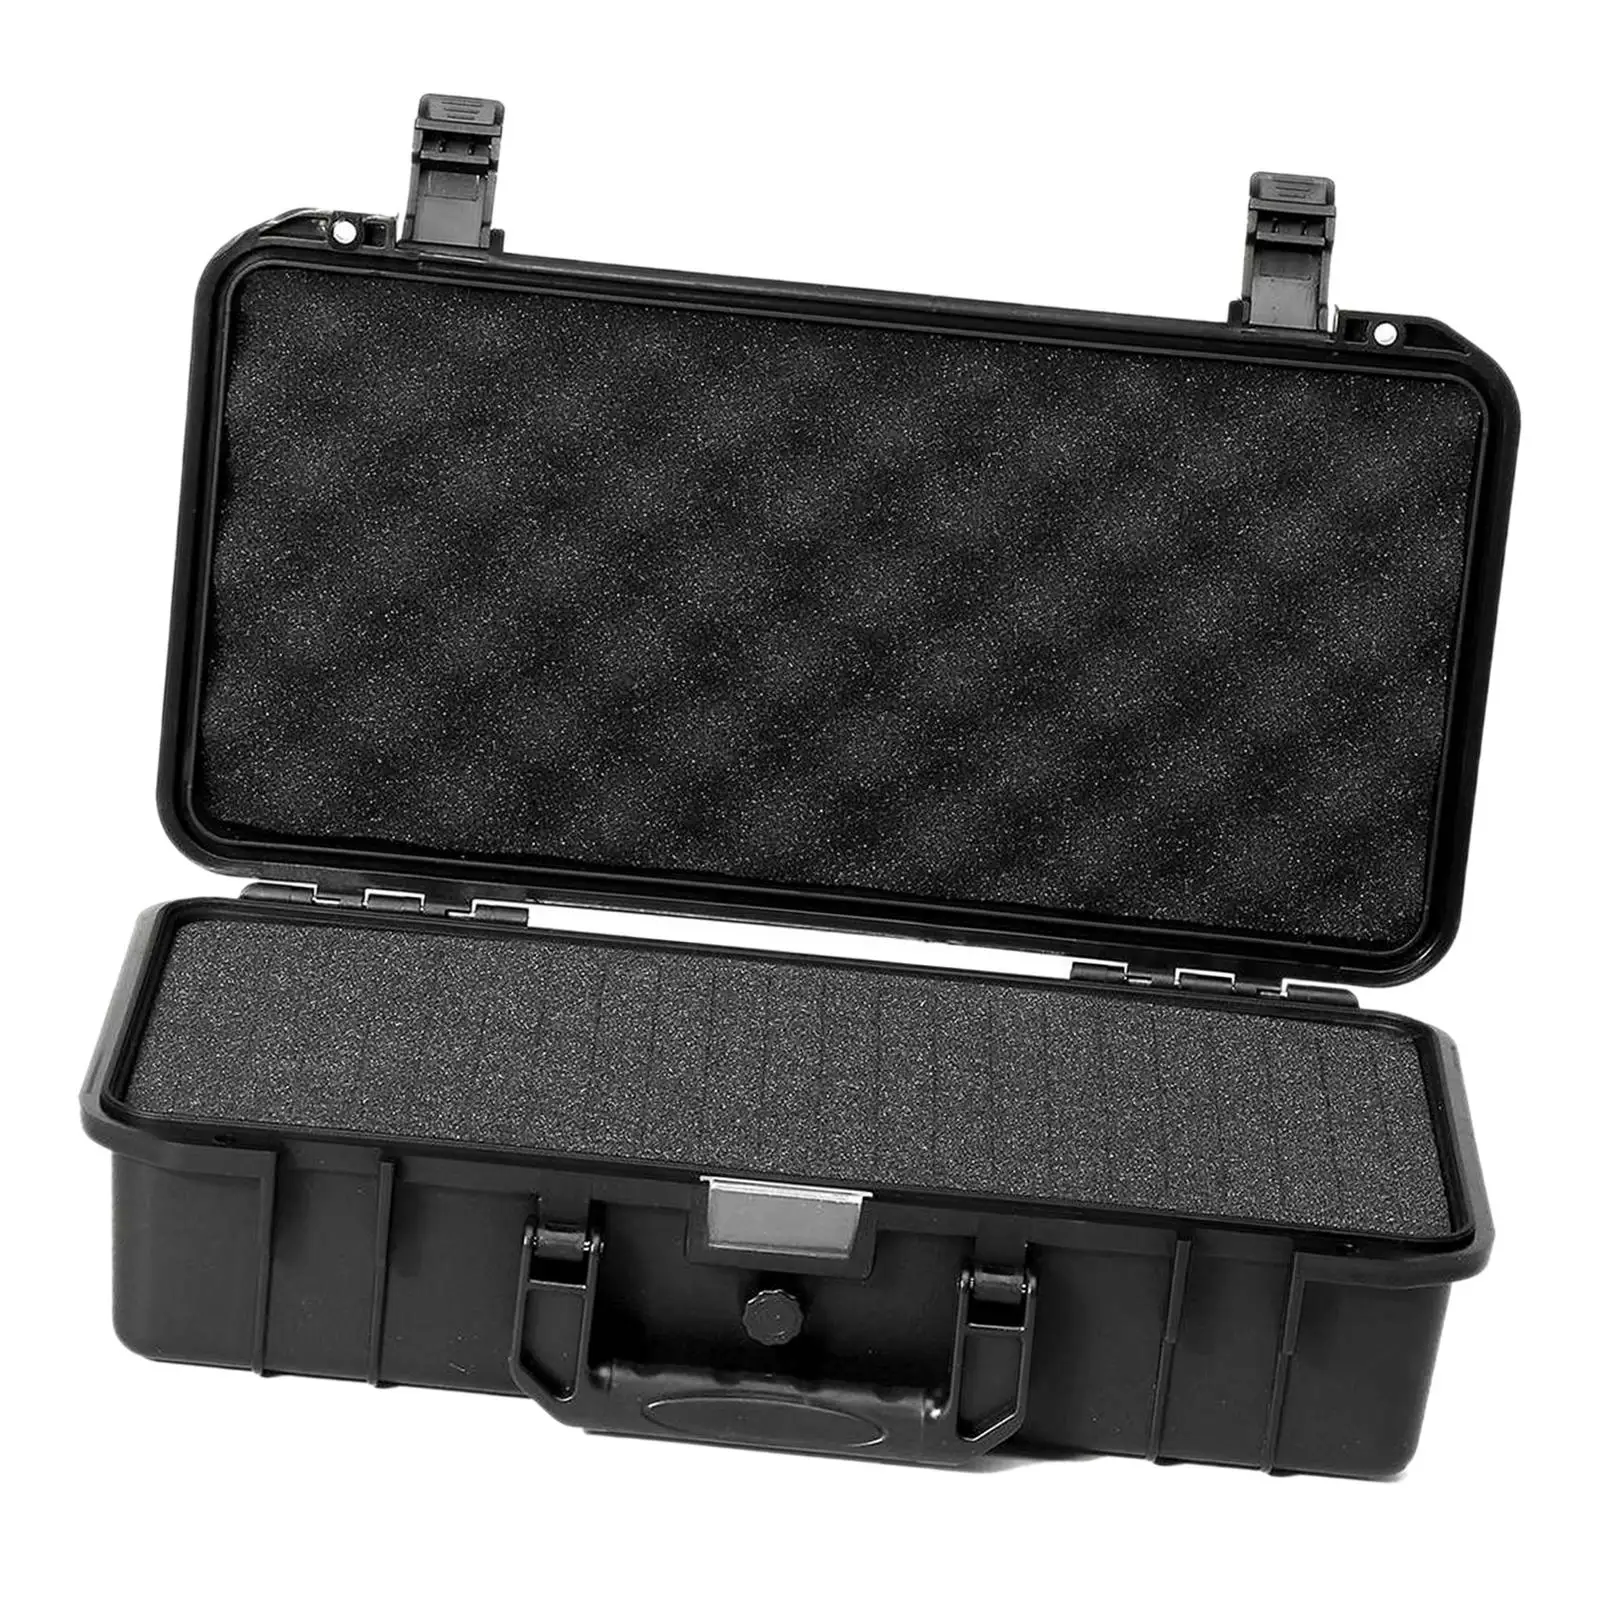 Universal Protect Toolbox Anti Impact Sealed Durable Lightweight Safety Box for Outdoor